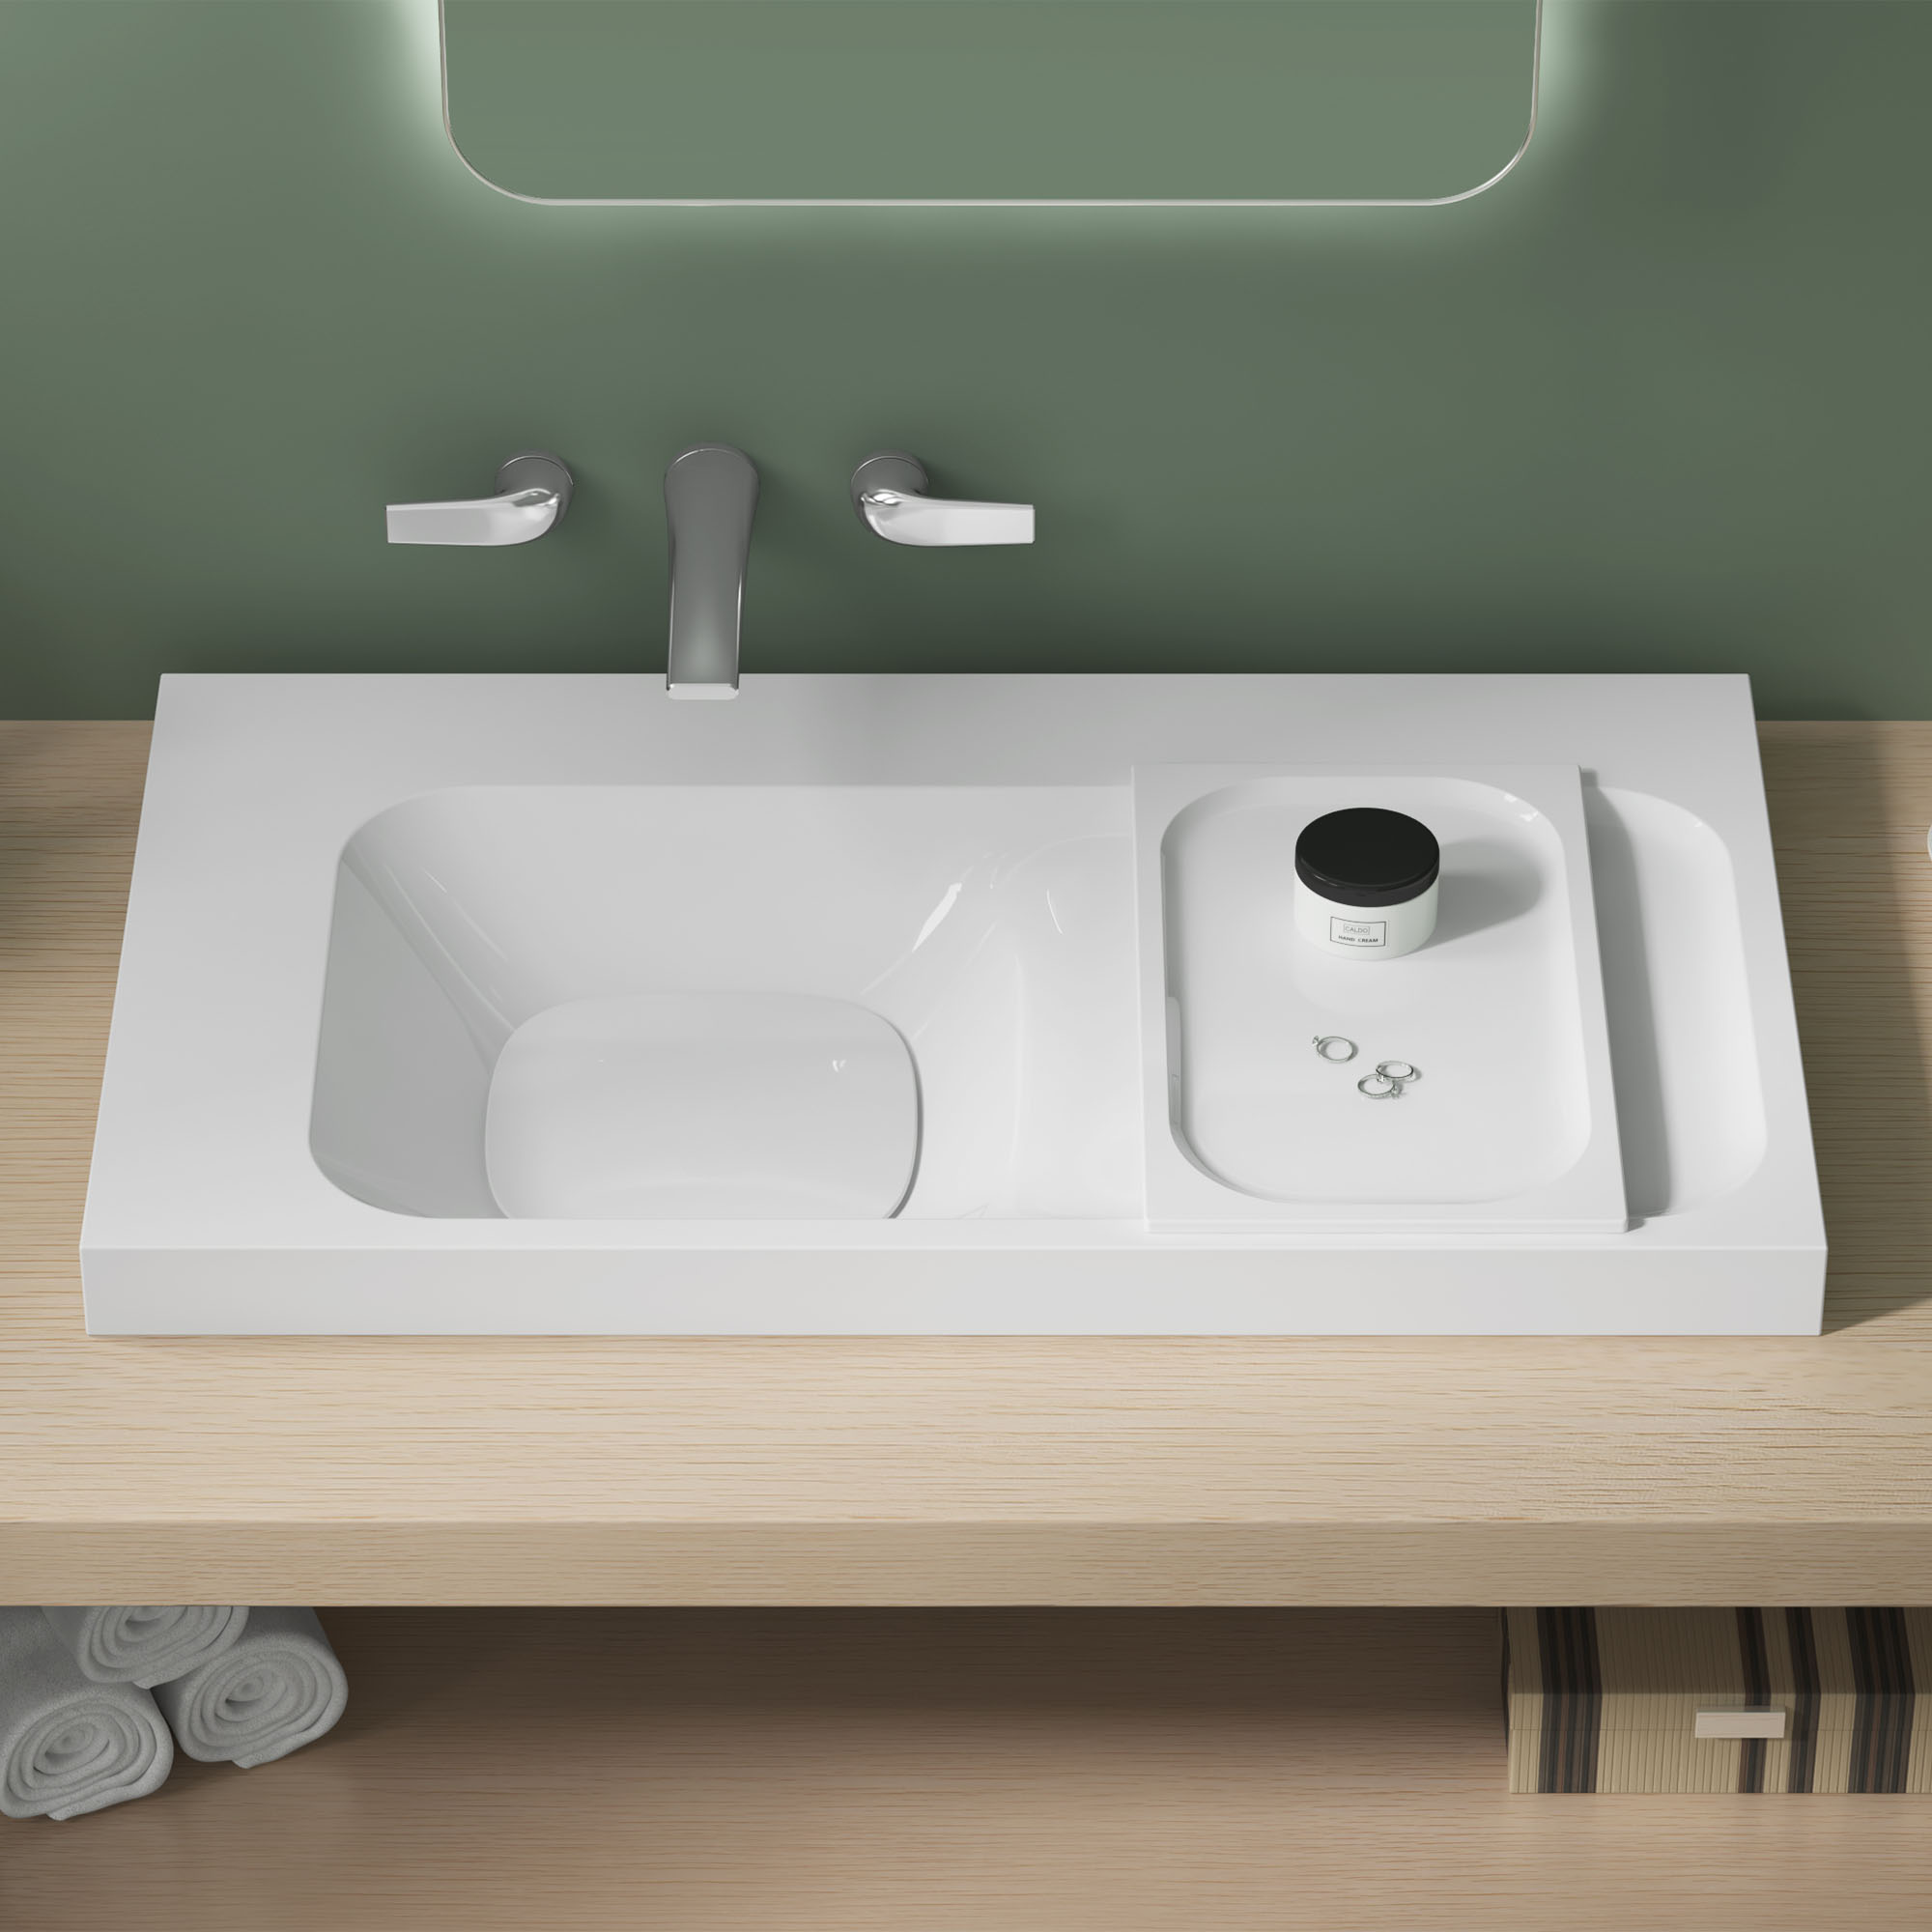 DXV Modulus® Above Counter Sink, No Hole 